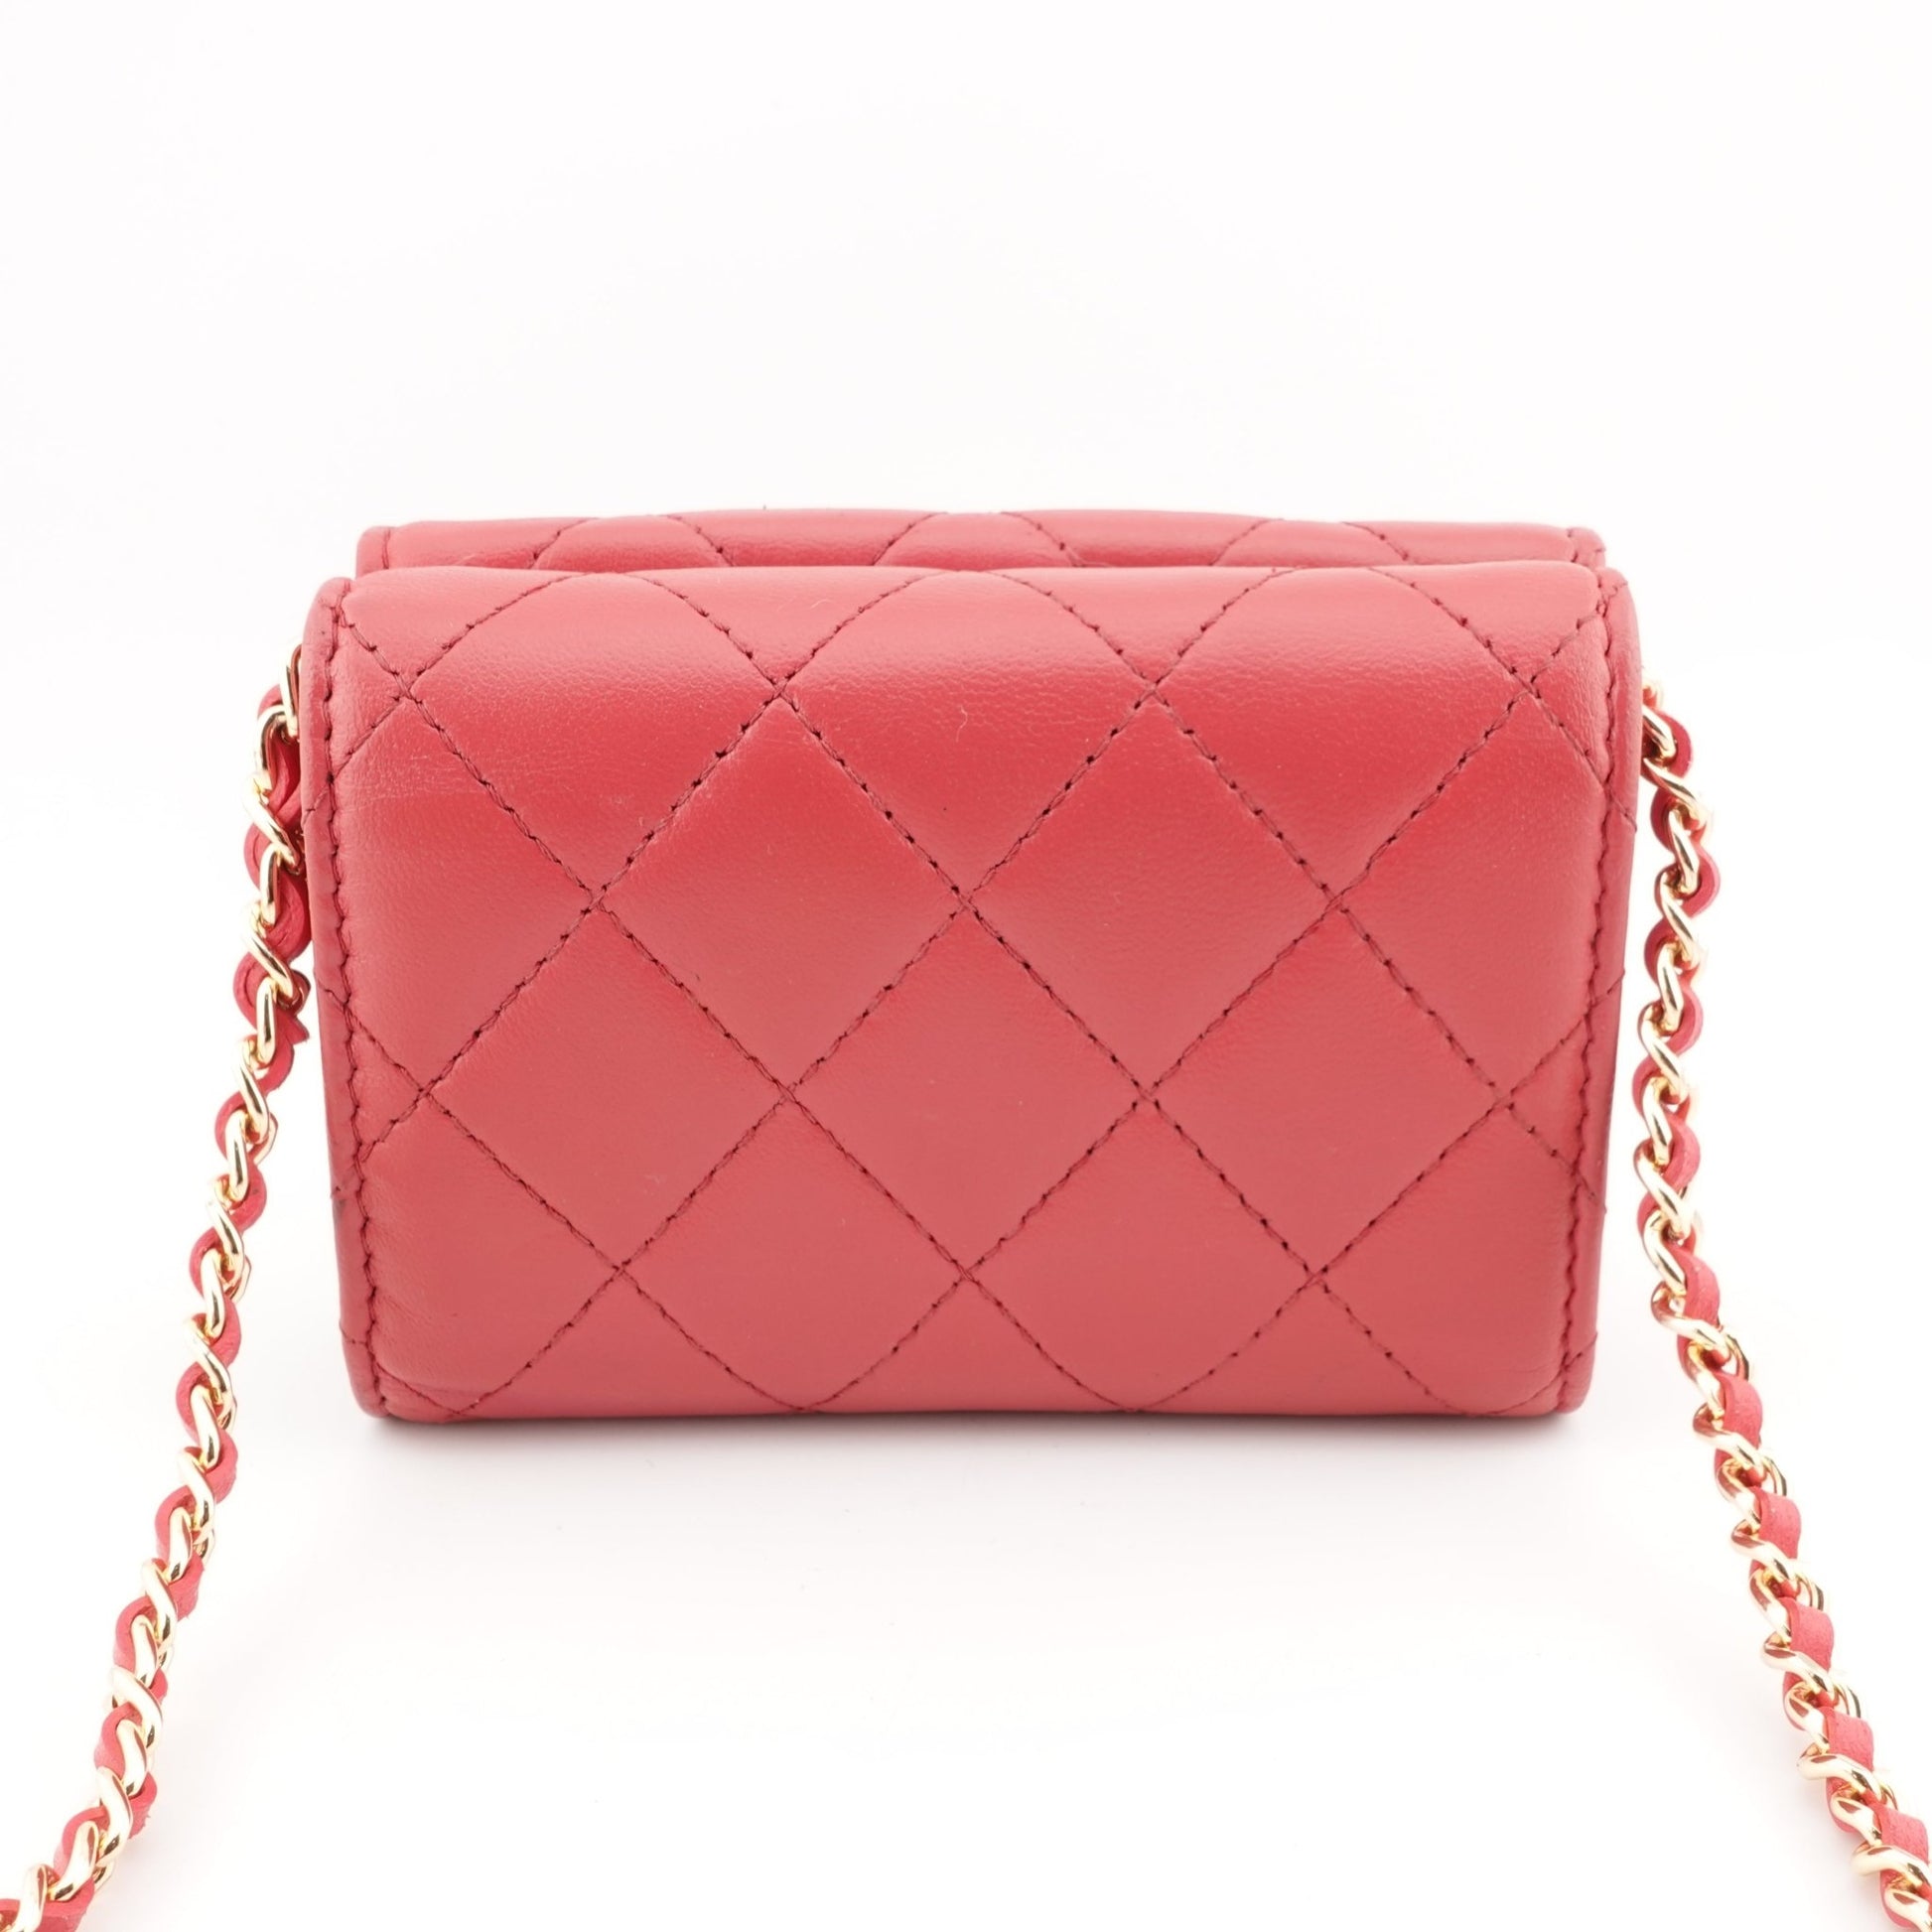 CHANEL Lambskin Classic Double Sided Wallet on Chain - Bag Envy